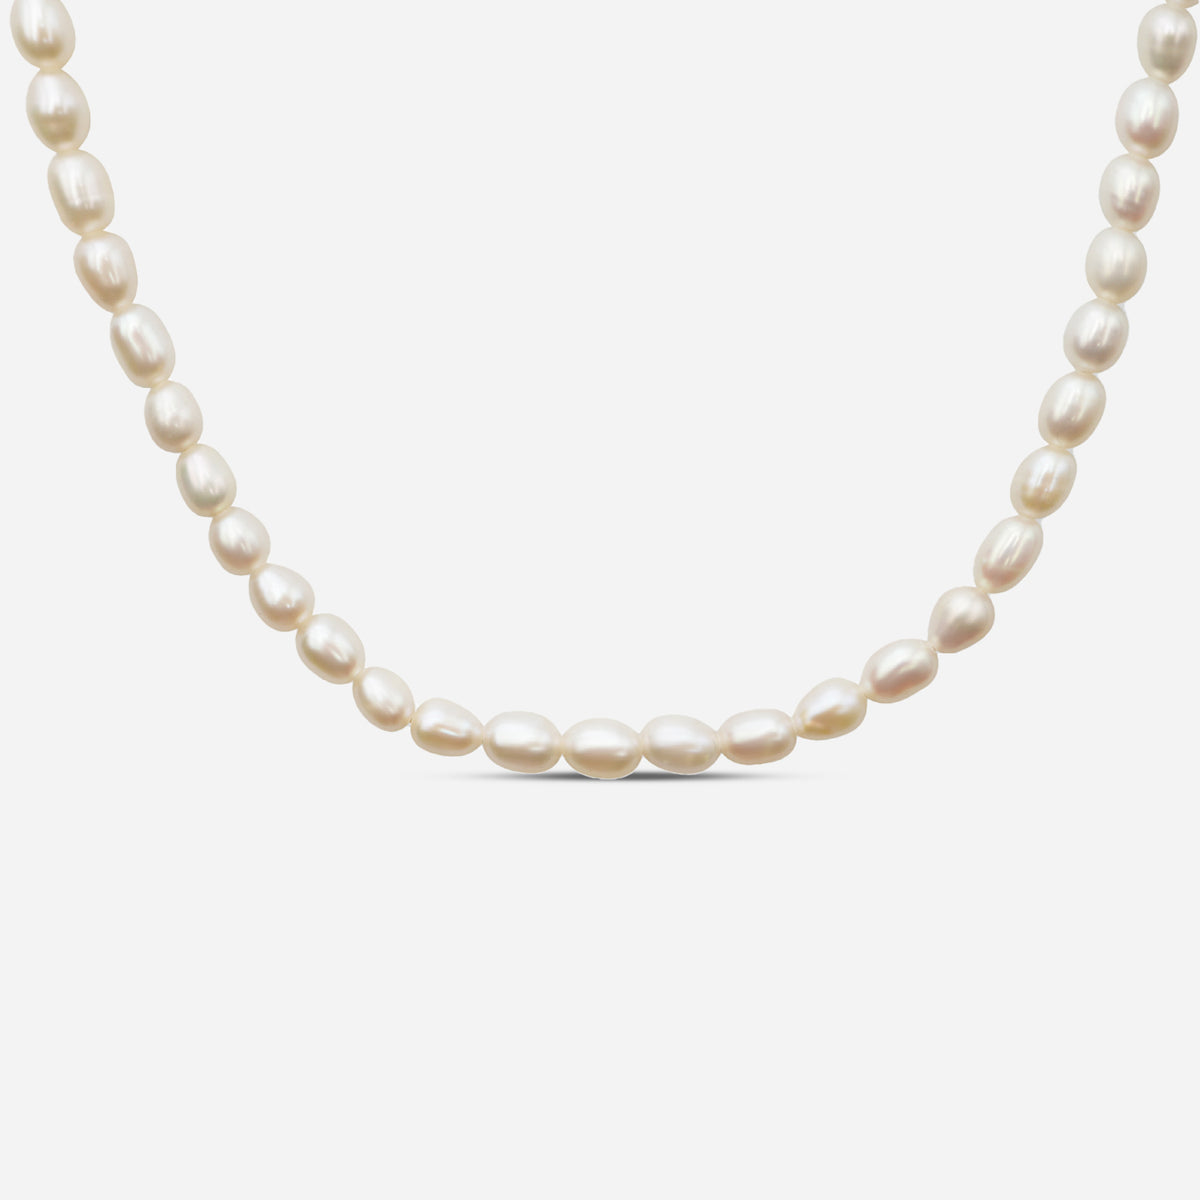 Pearl necklace "Rosa" - Silver